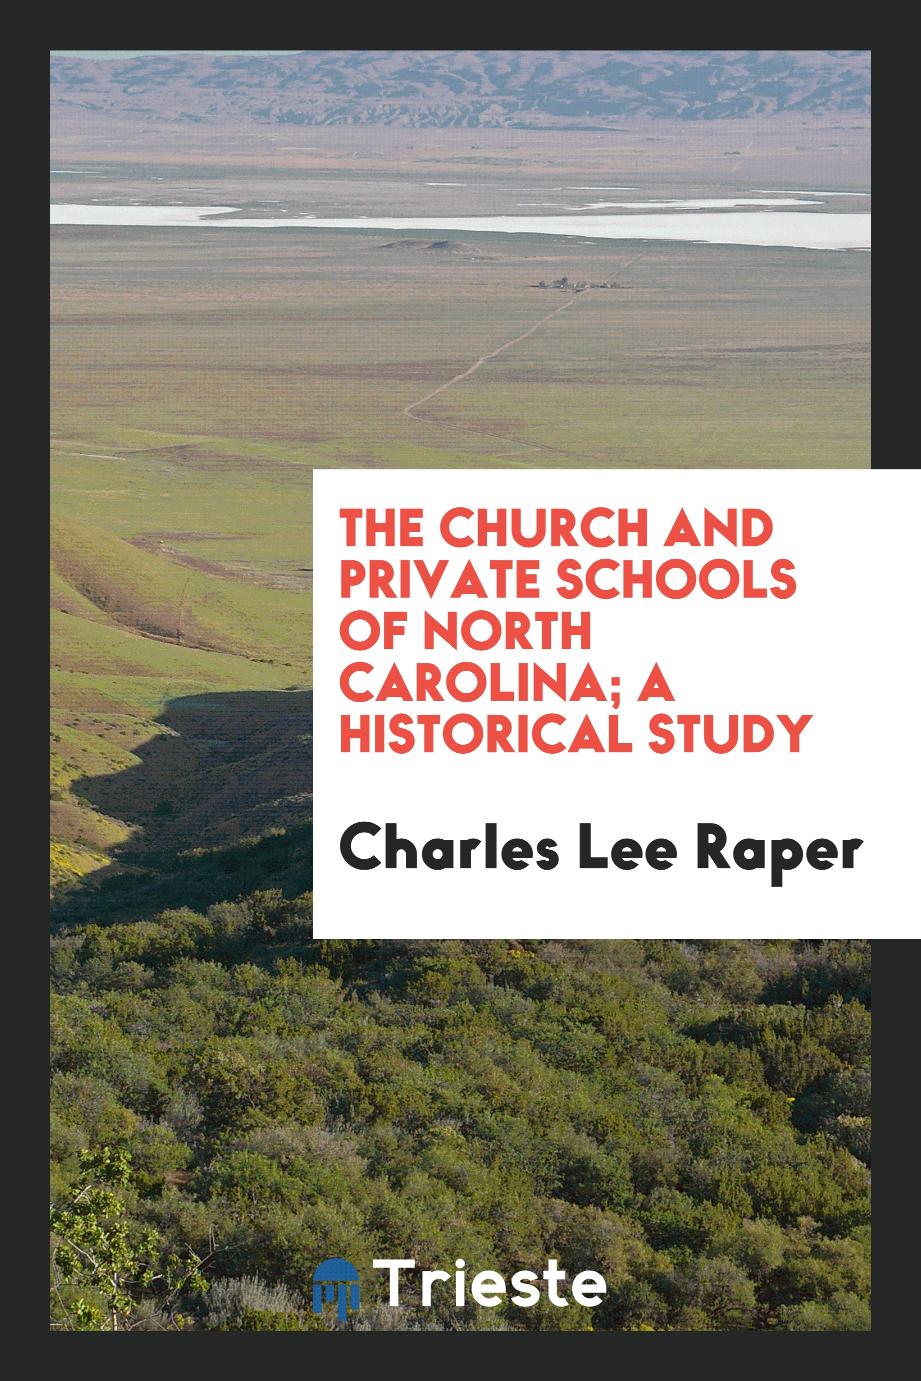 The church and private schools of North Carolina; a historical study